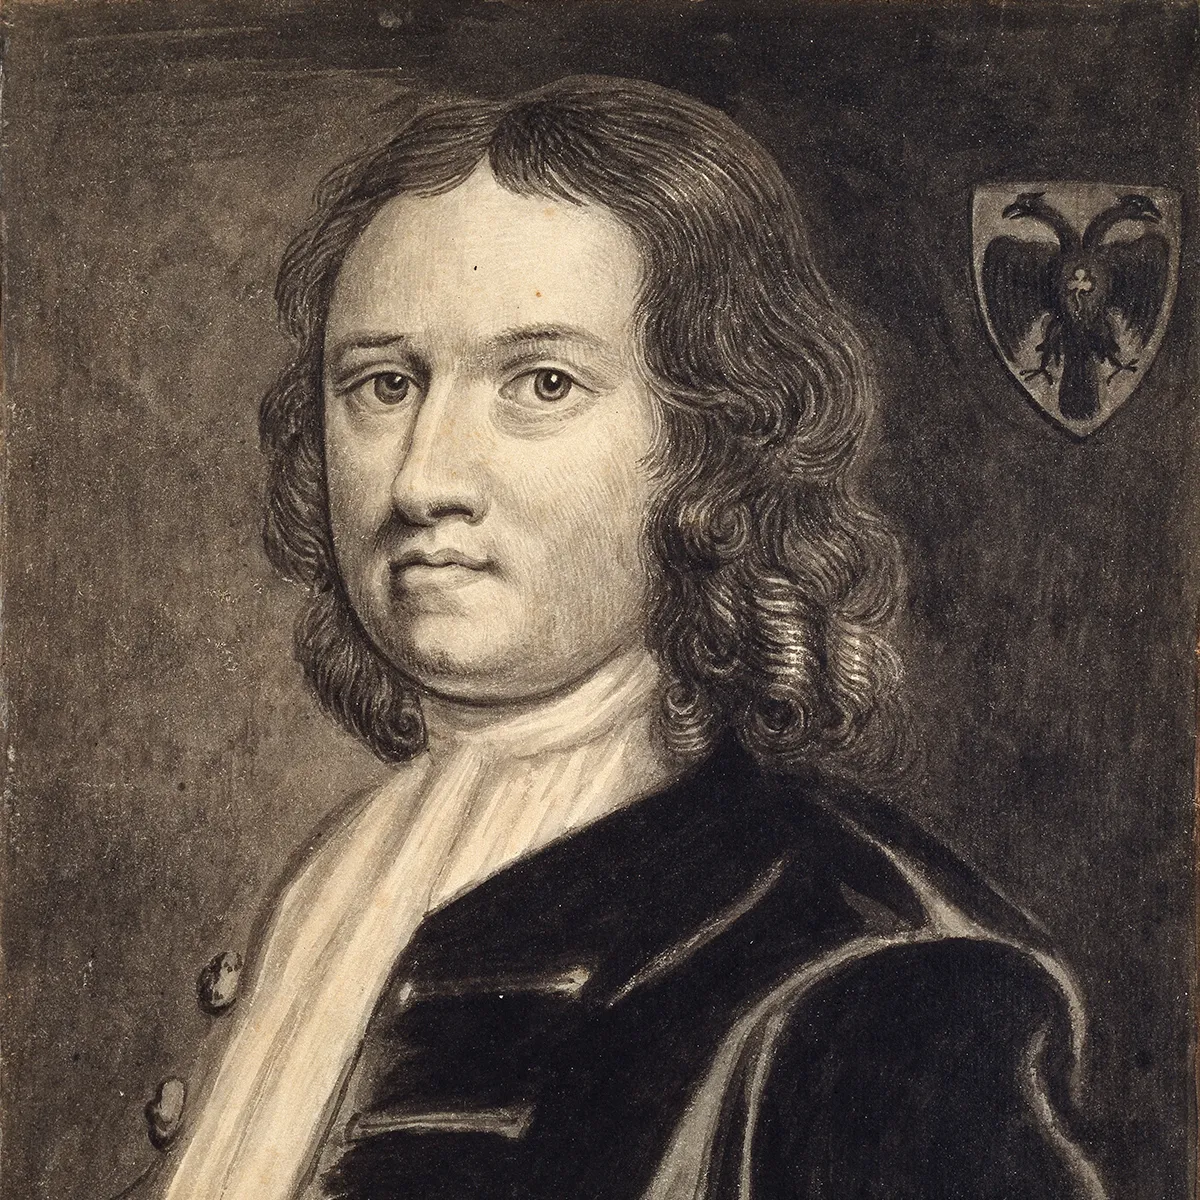 A self portrait of William Stukeley. Photo by Ashmolean Museum/Heritage Images/Getty Images